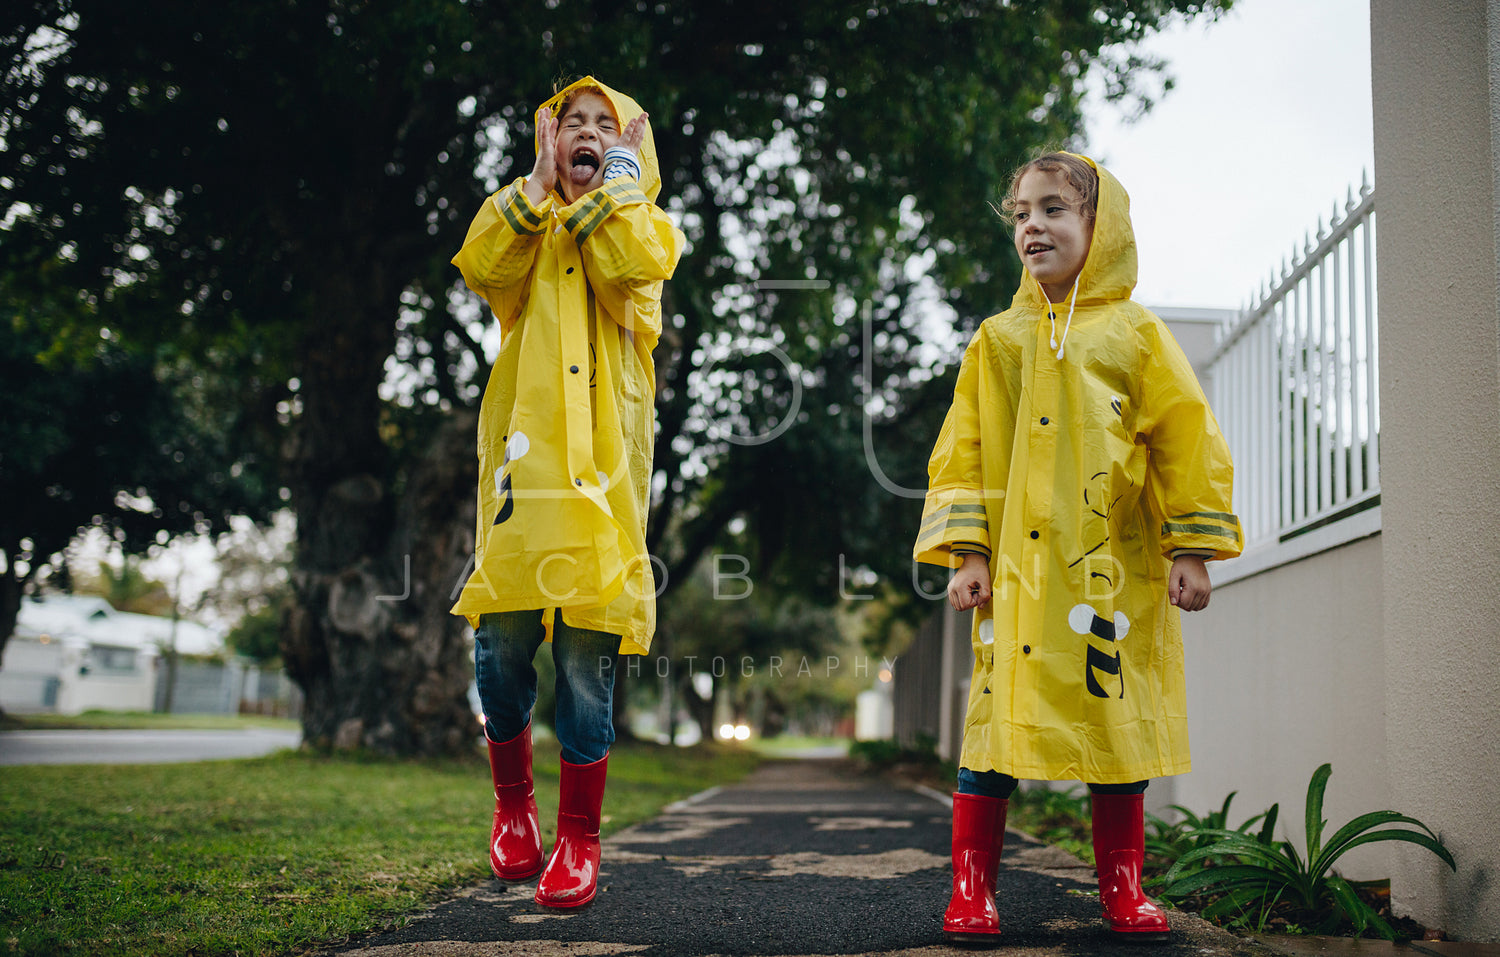 Identical twin sisters having fun outside on a rainy day